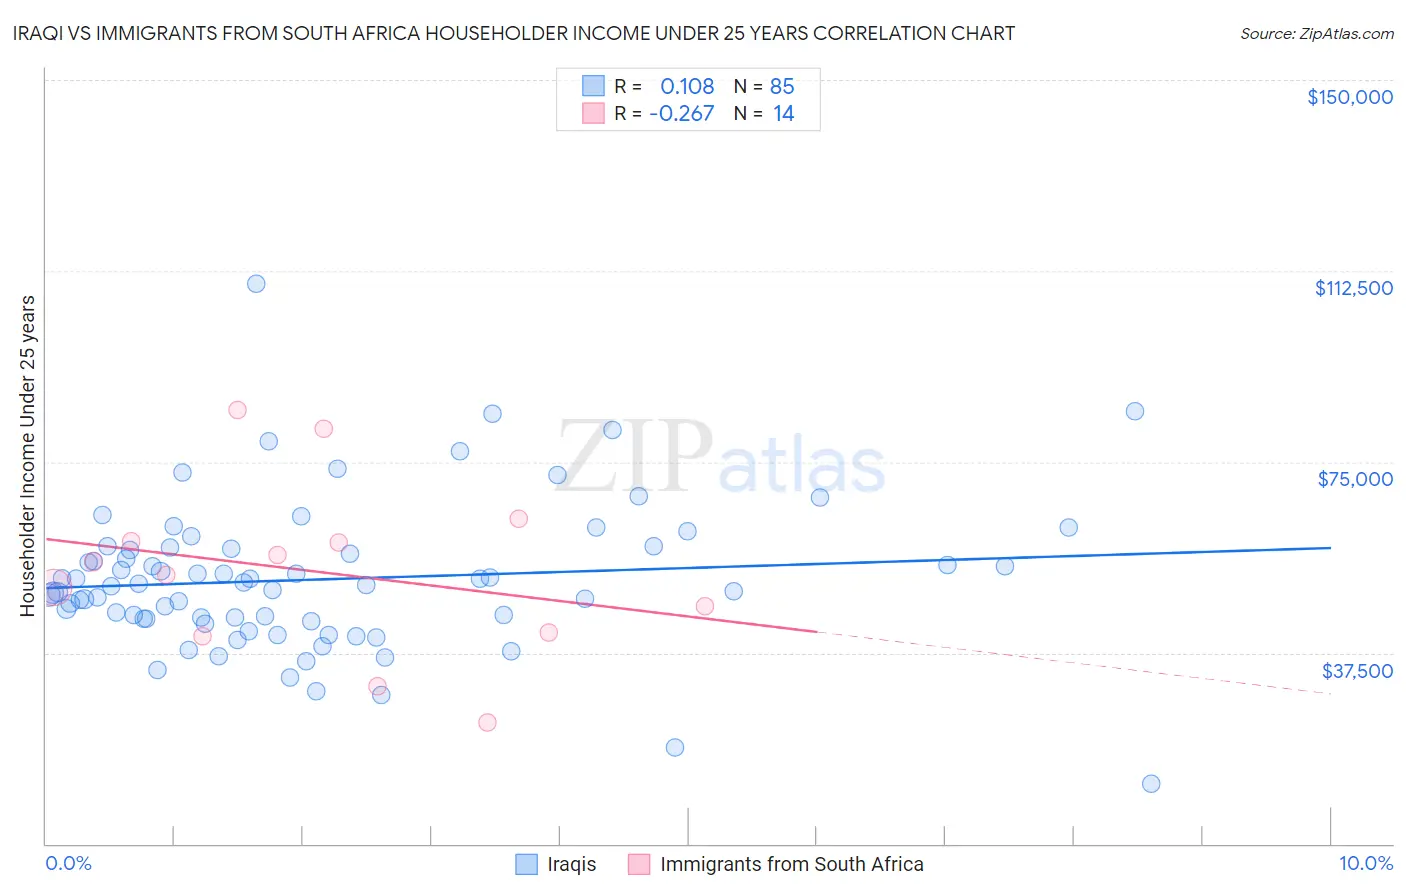 Iraqi vs Immigrants from South Africa Householder Income Under 25 years